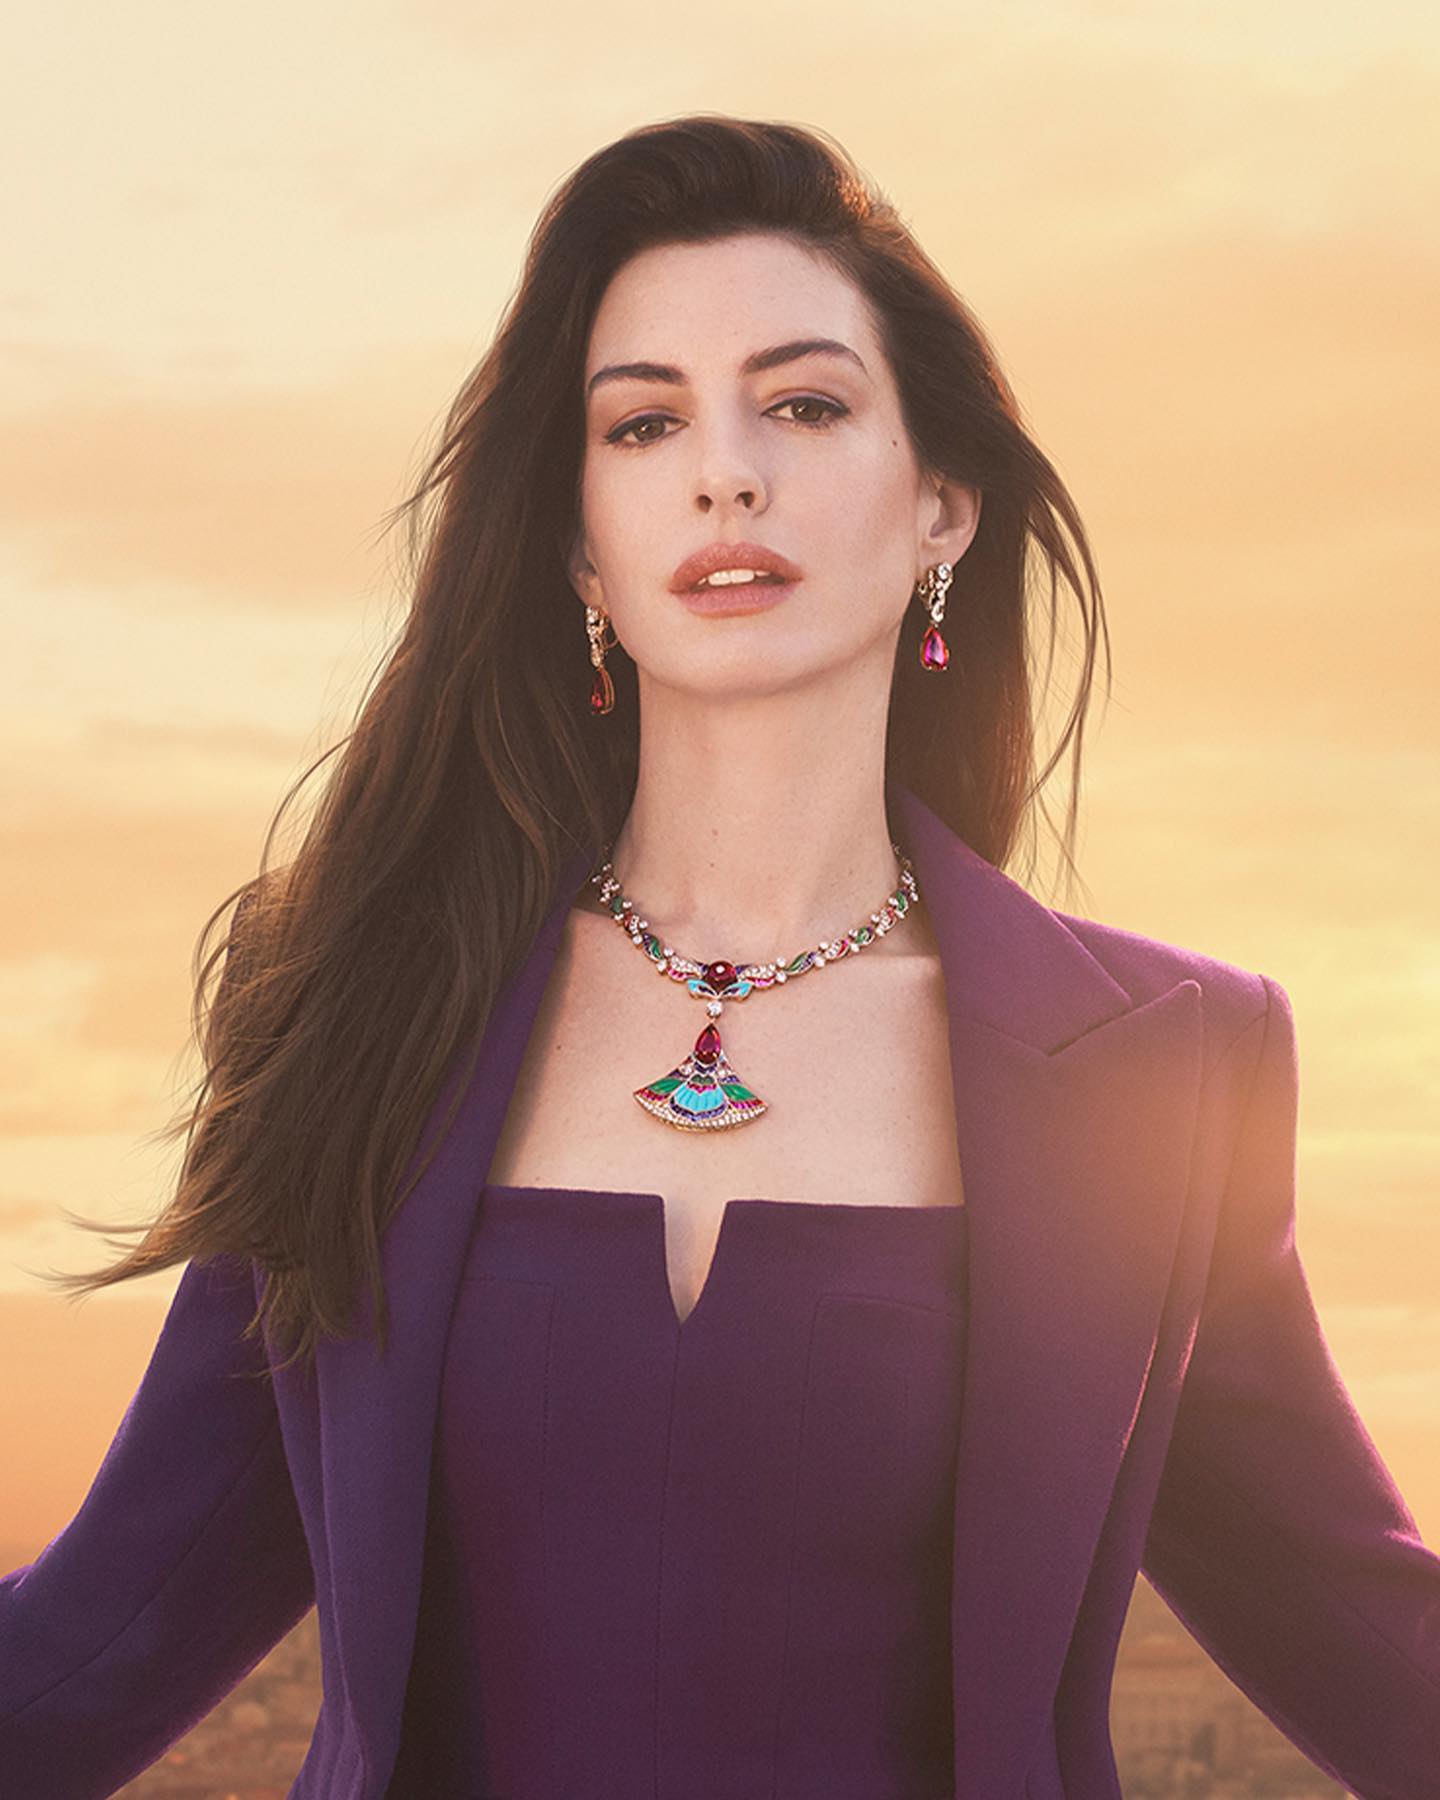 “With its intricate mosaic design inspired by the Mughal Empire, the Oriental Mosaic necklace symbolizes bold magnificence. It makes you feel as only Bulgari High Jewelry can.”Starring @annehathaway Shot by @davidsimsofficial Video making-of by @atravisio Directed by @maxim.derevianko Music by @guazzonemarco #Bulgari #BulgariHighJewelry #BulgariMediterranea #MagnificenceNeverEnds